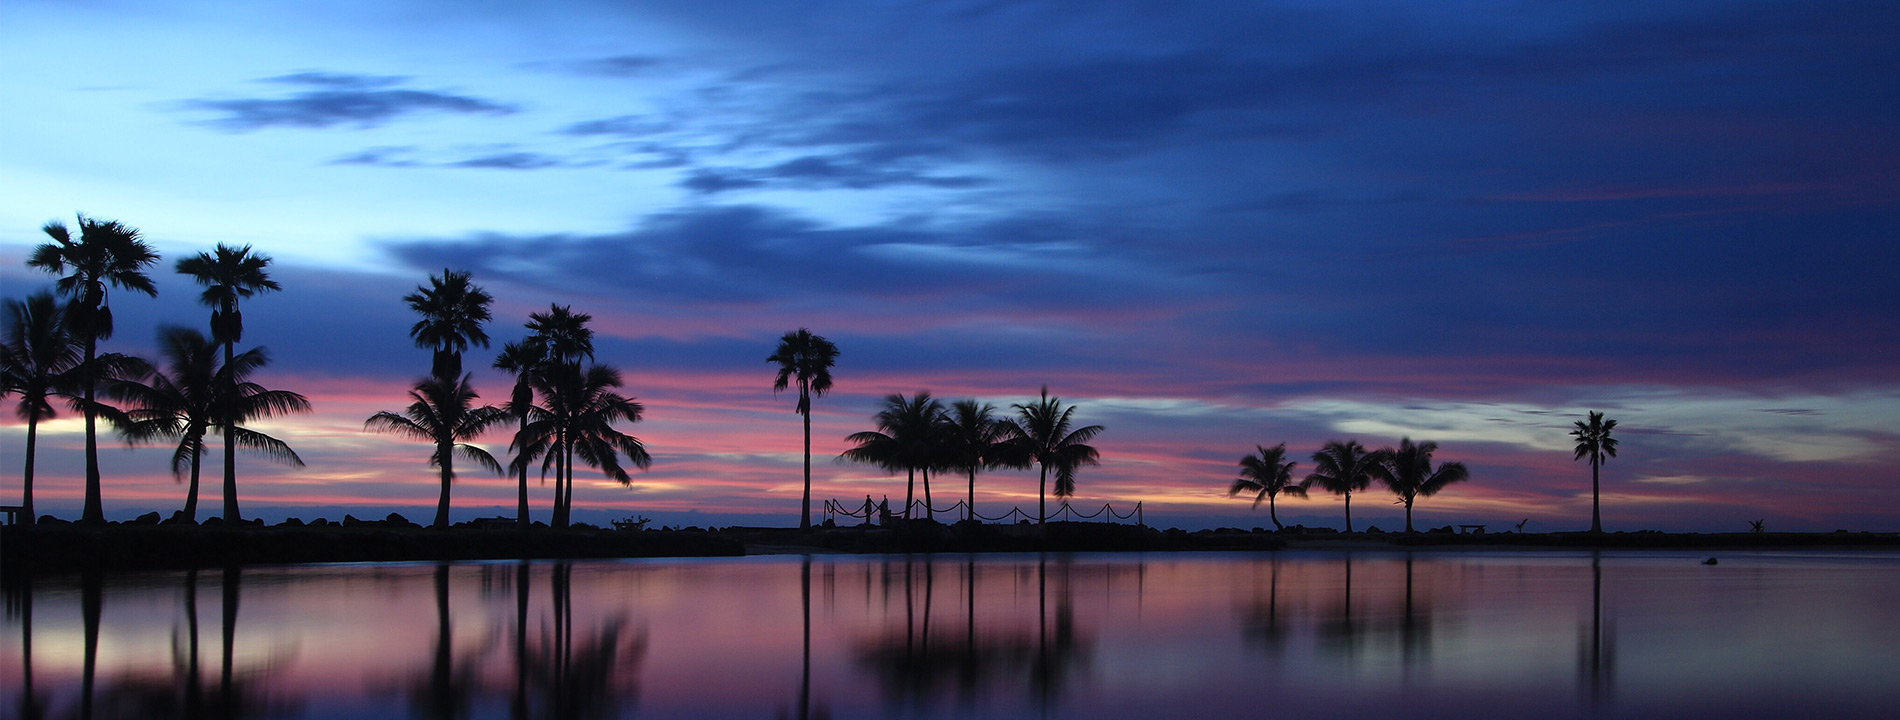 Palm trees by the water at dusk.